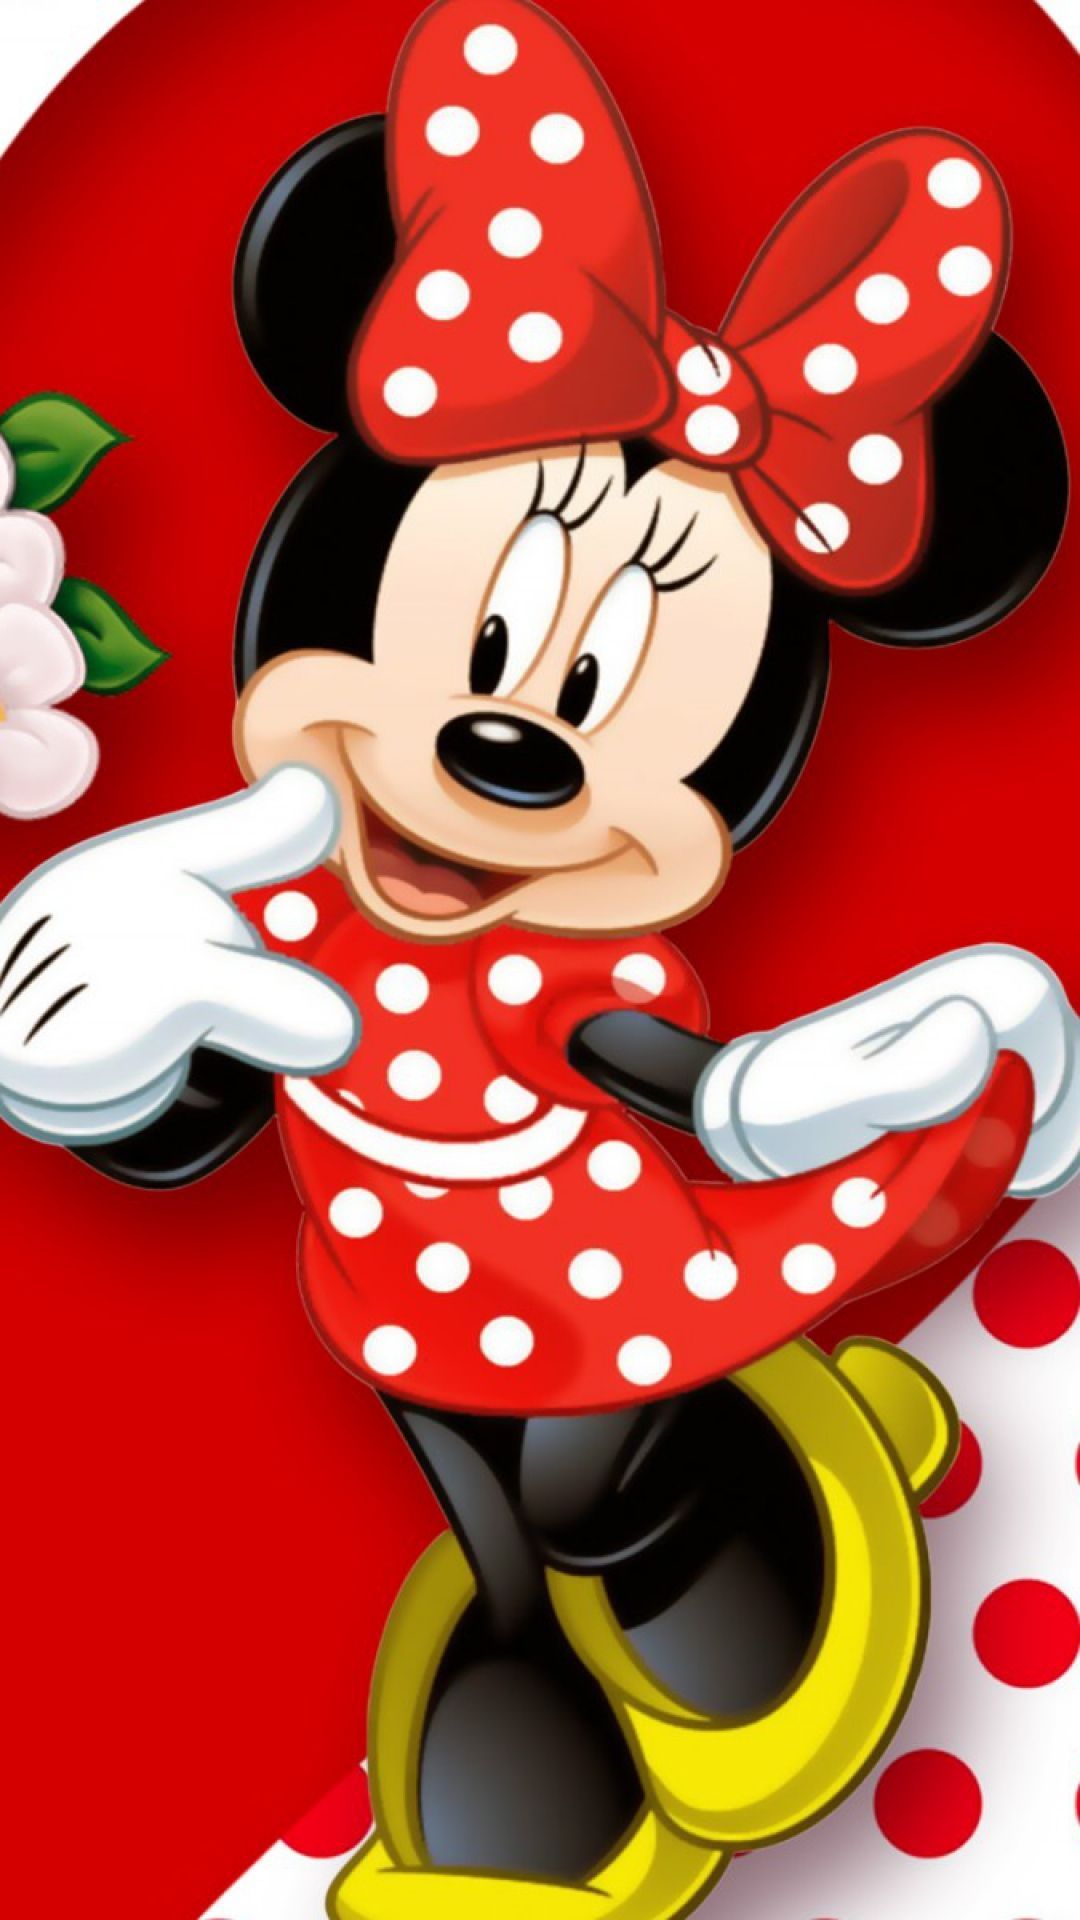 Mickey Mouse Wallpaper For Mobile - HD Wallpaper 